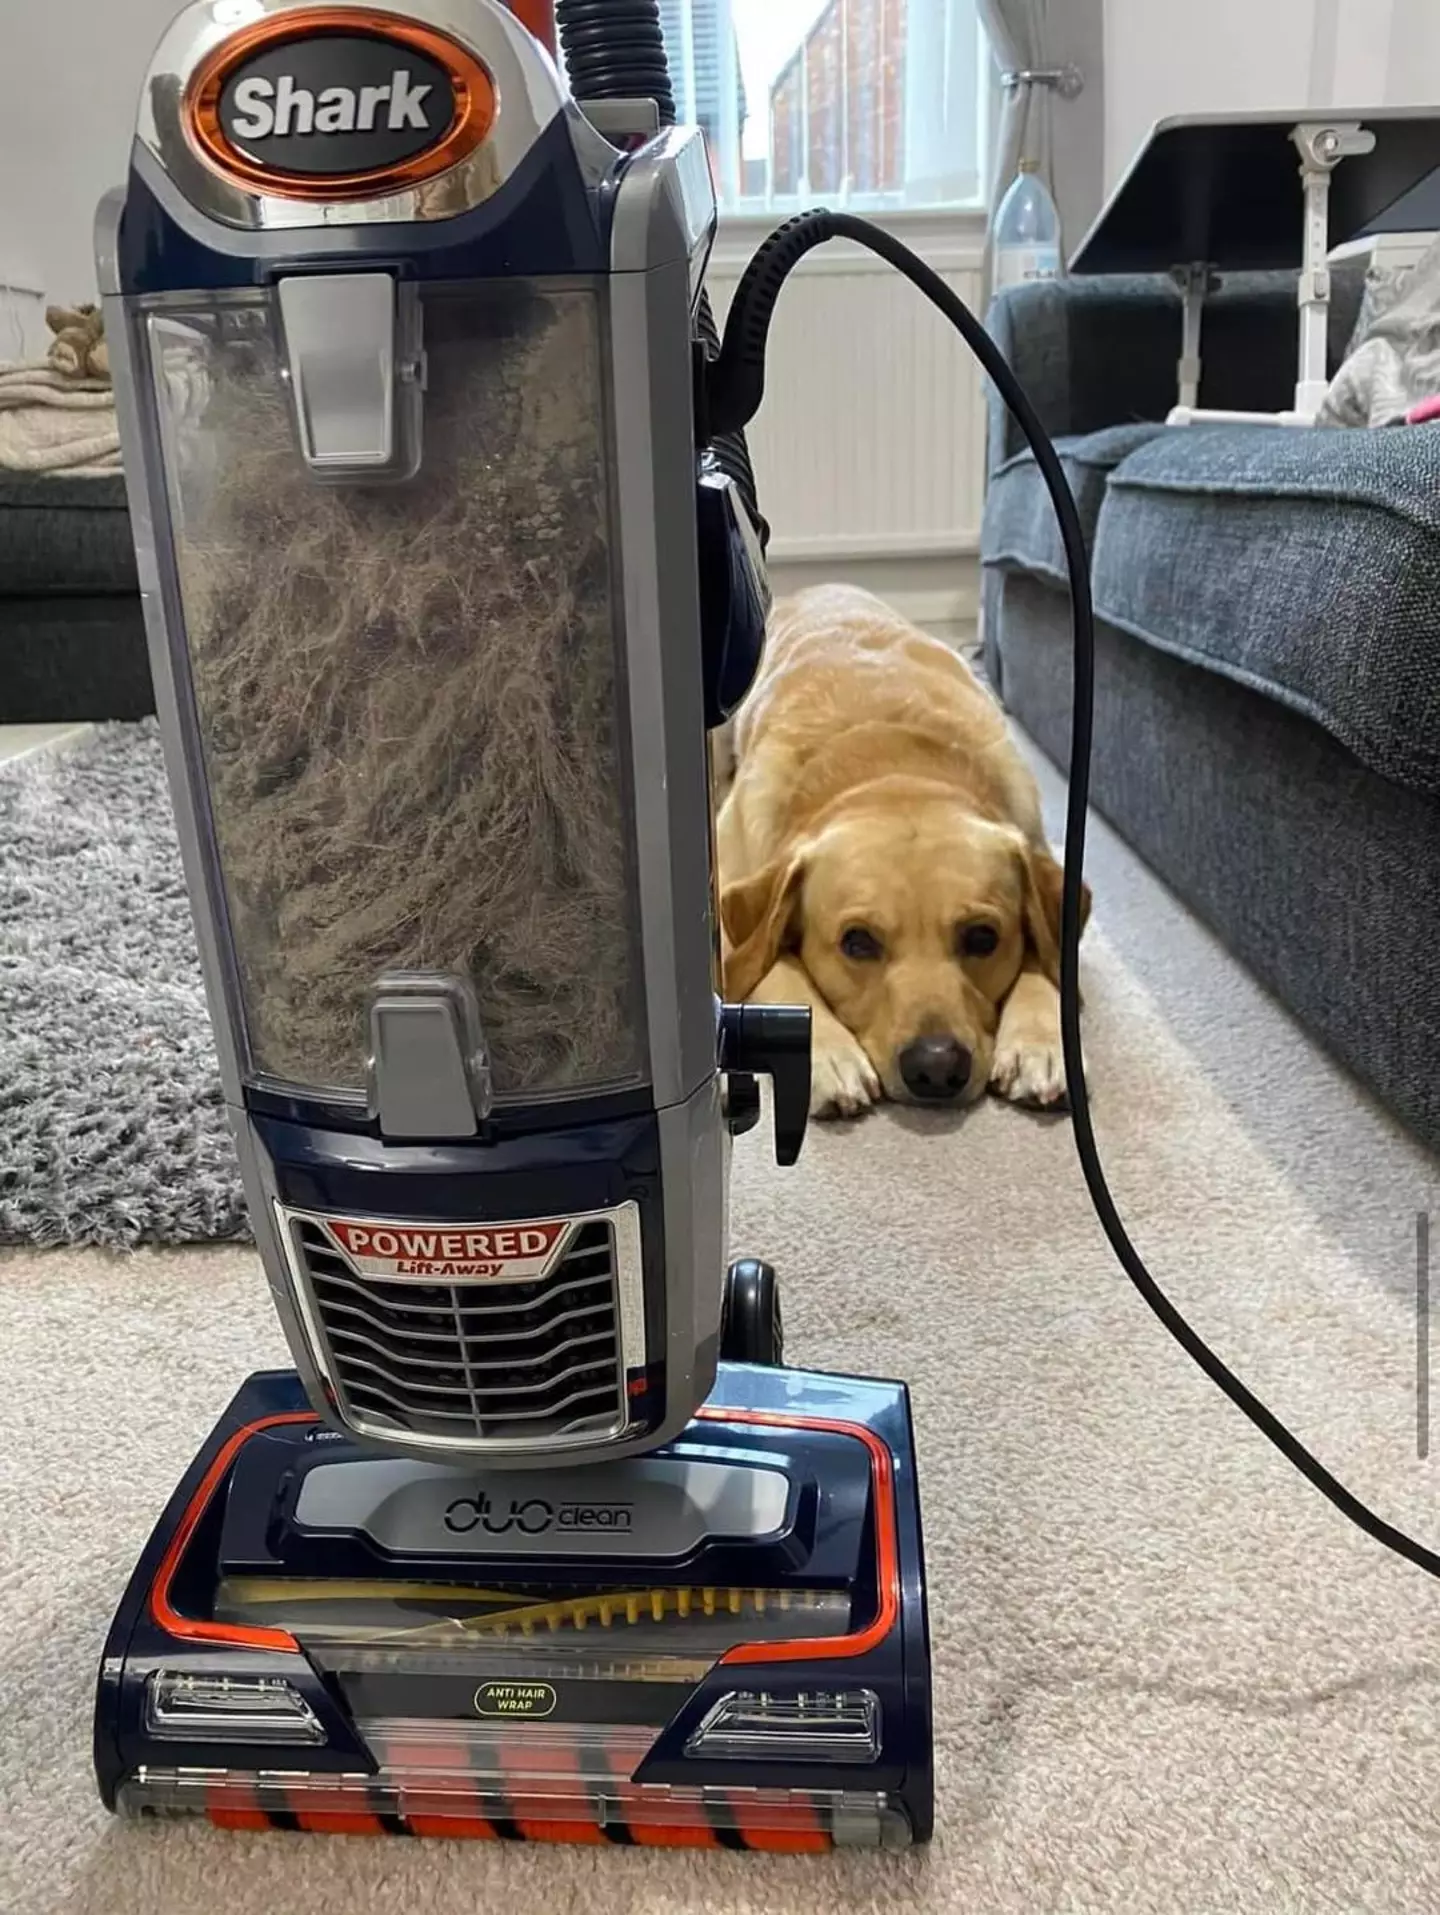 Lyndsey Garvey was left shocked after hoovering one room in her house with a corded vacuum after four years of using cordless.